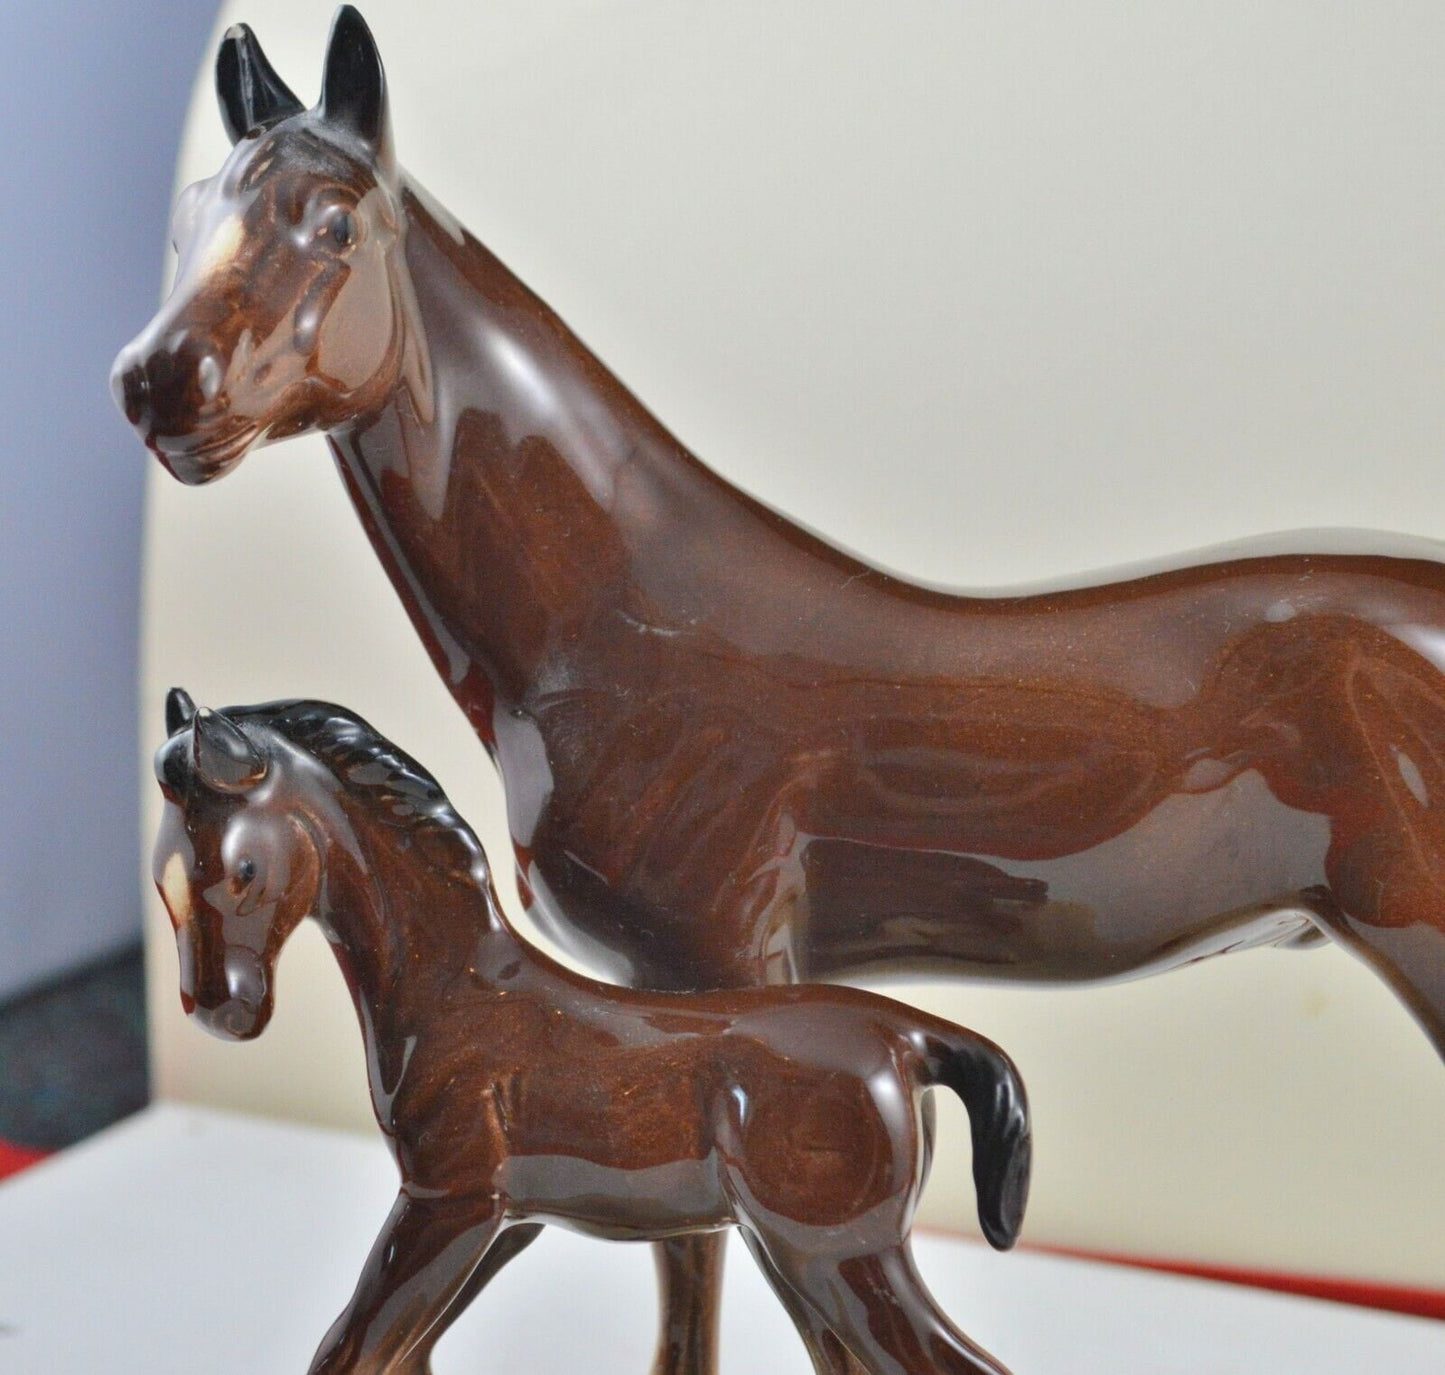 VINTAGE HERTWIG KATZHUTTE HORSE FIGURINE MARE AND FOAL - TMD167207